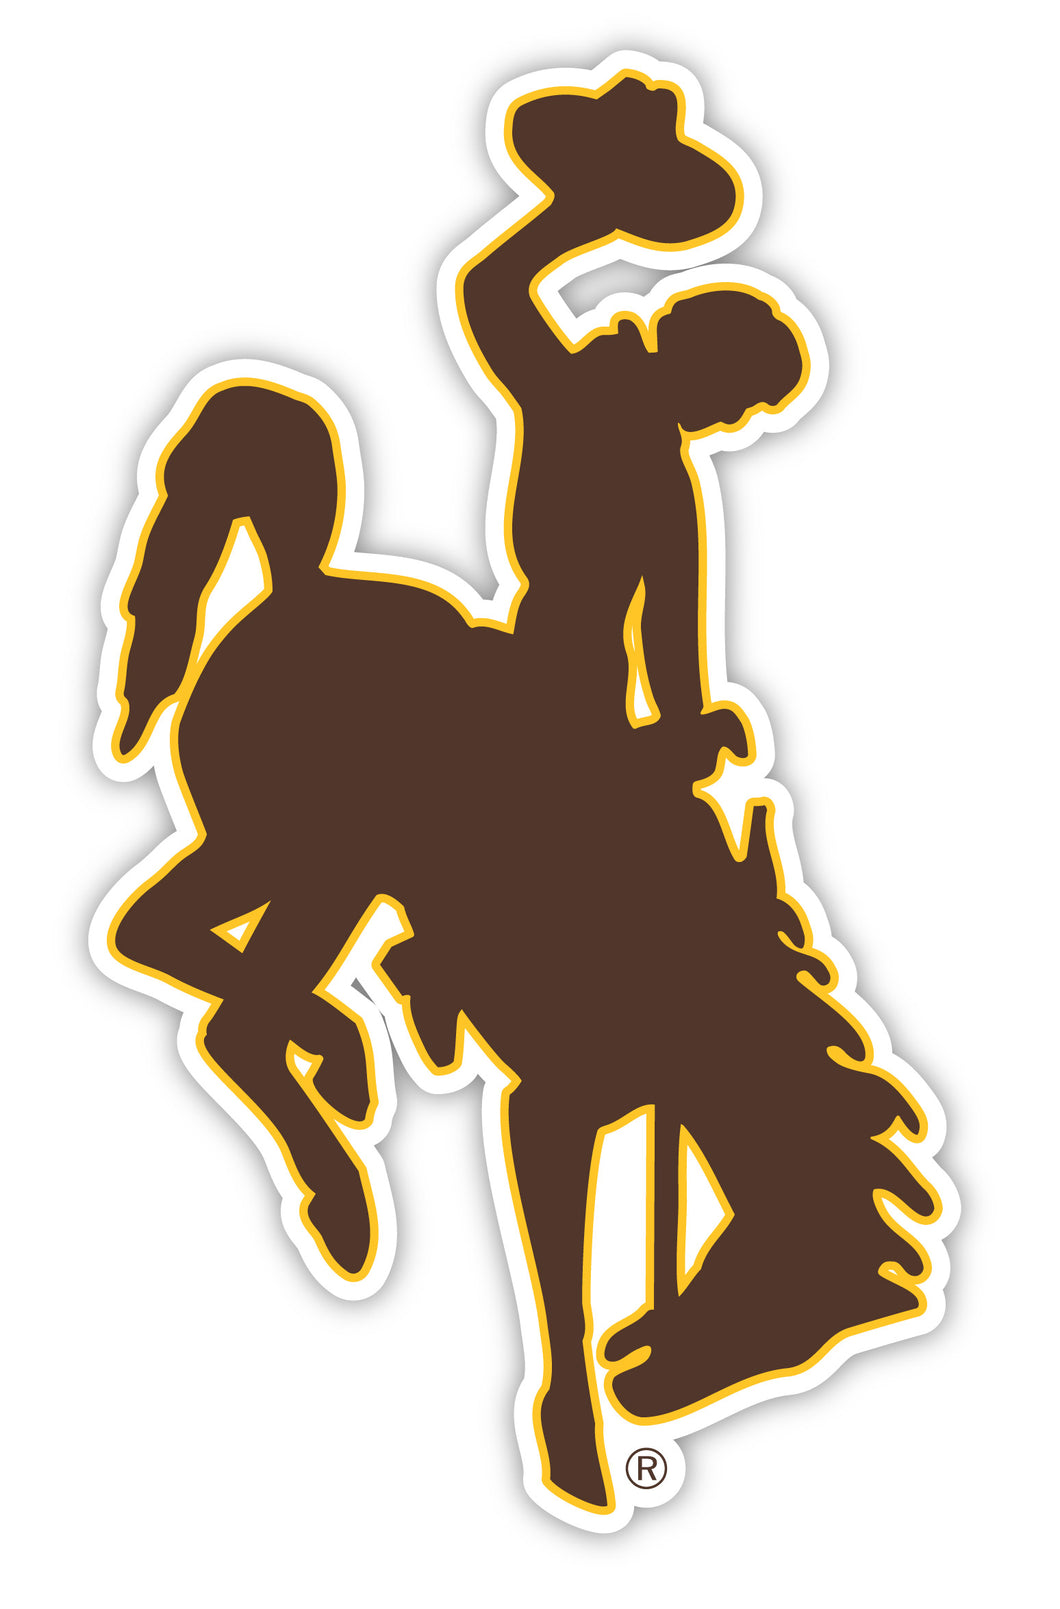 University of Wyoming 4-Inch Mascot Logo NCAA Vinyl Decal Sticker for Fans, Students, and Alumni